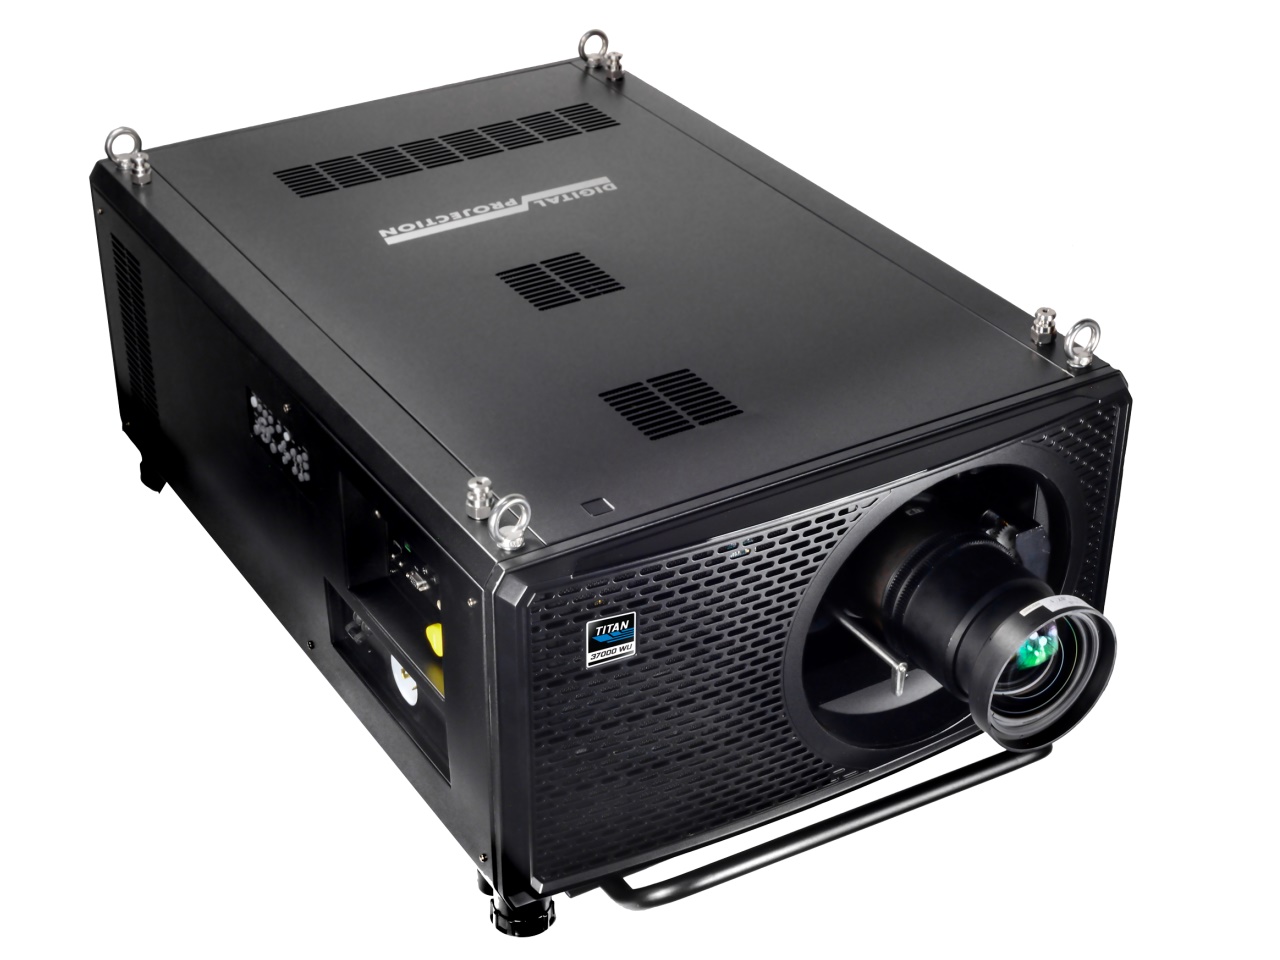 TITAN 37000 WU 37000 Lumens/WUXGA Resolution/Compatible with Prior TITAN Lenses Projector by Digital Projection